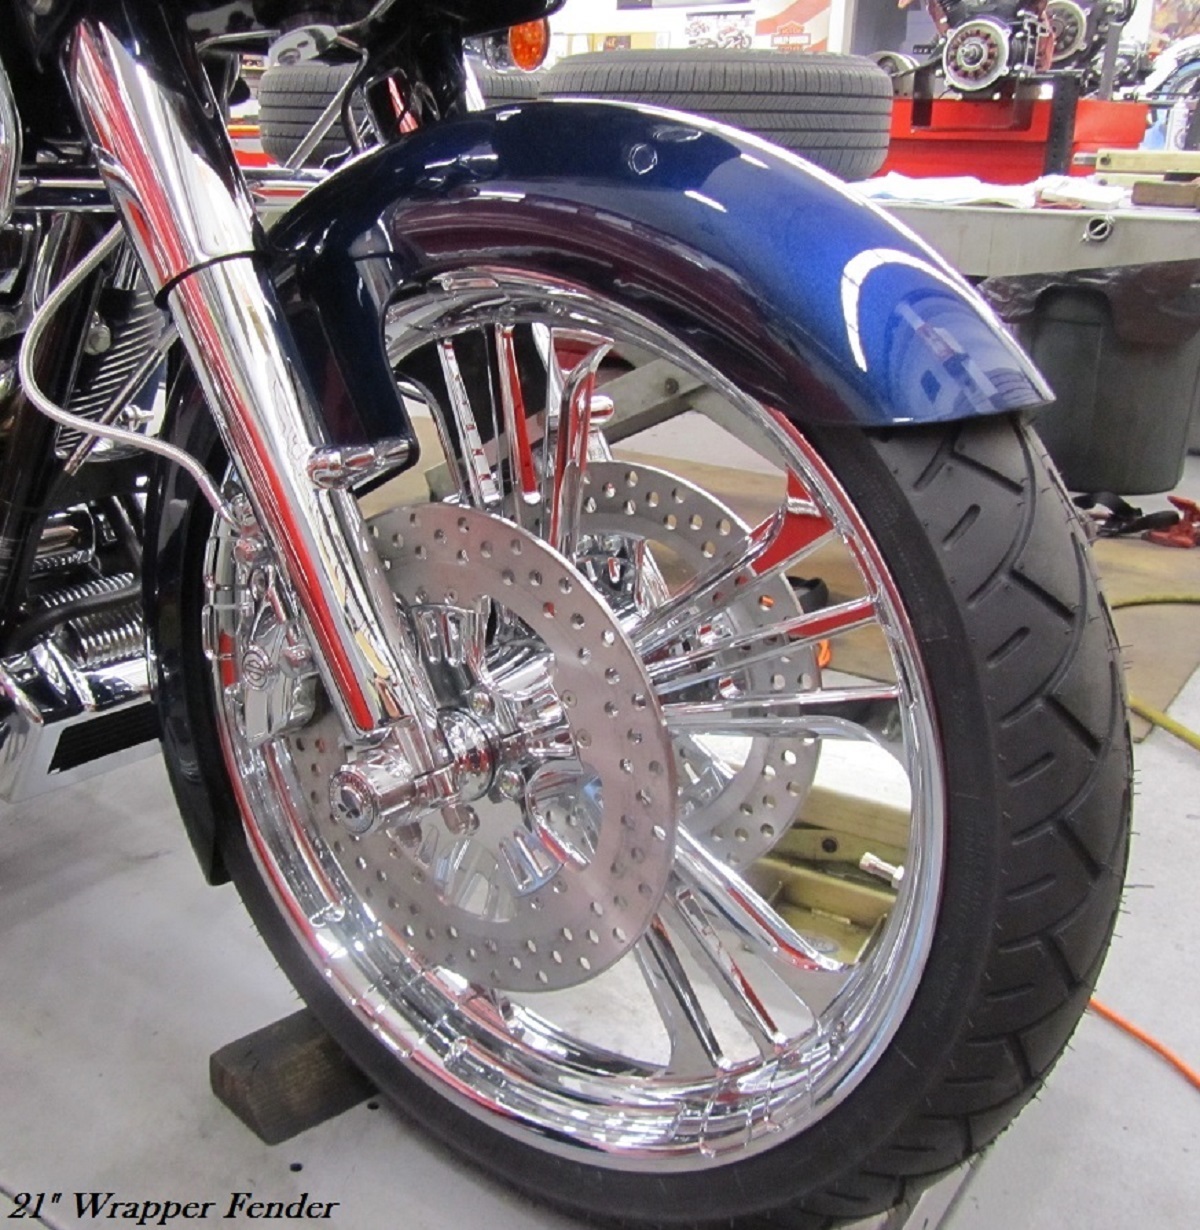 21" Steel Wrapper Fender (Painted to match factory color big blue pearl)